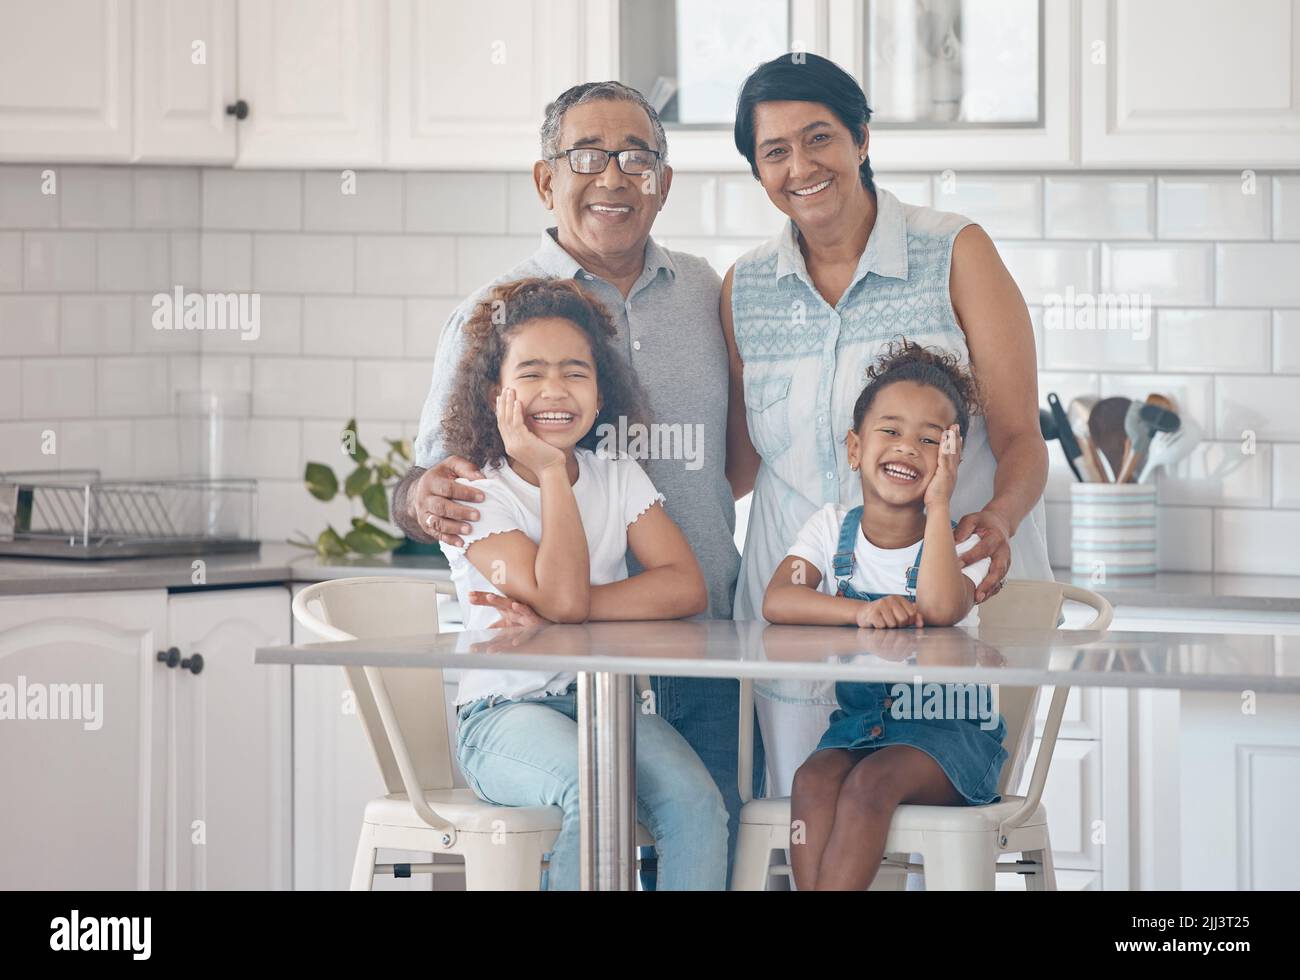 Love is all around us. grandparents spending time with their grandchildren. Stock Photo